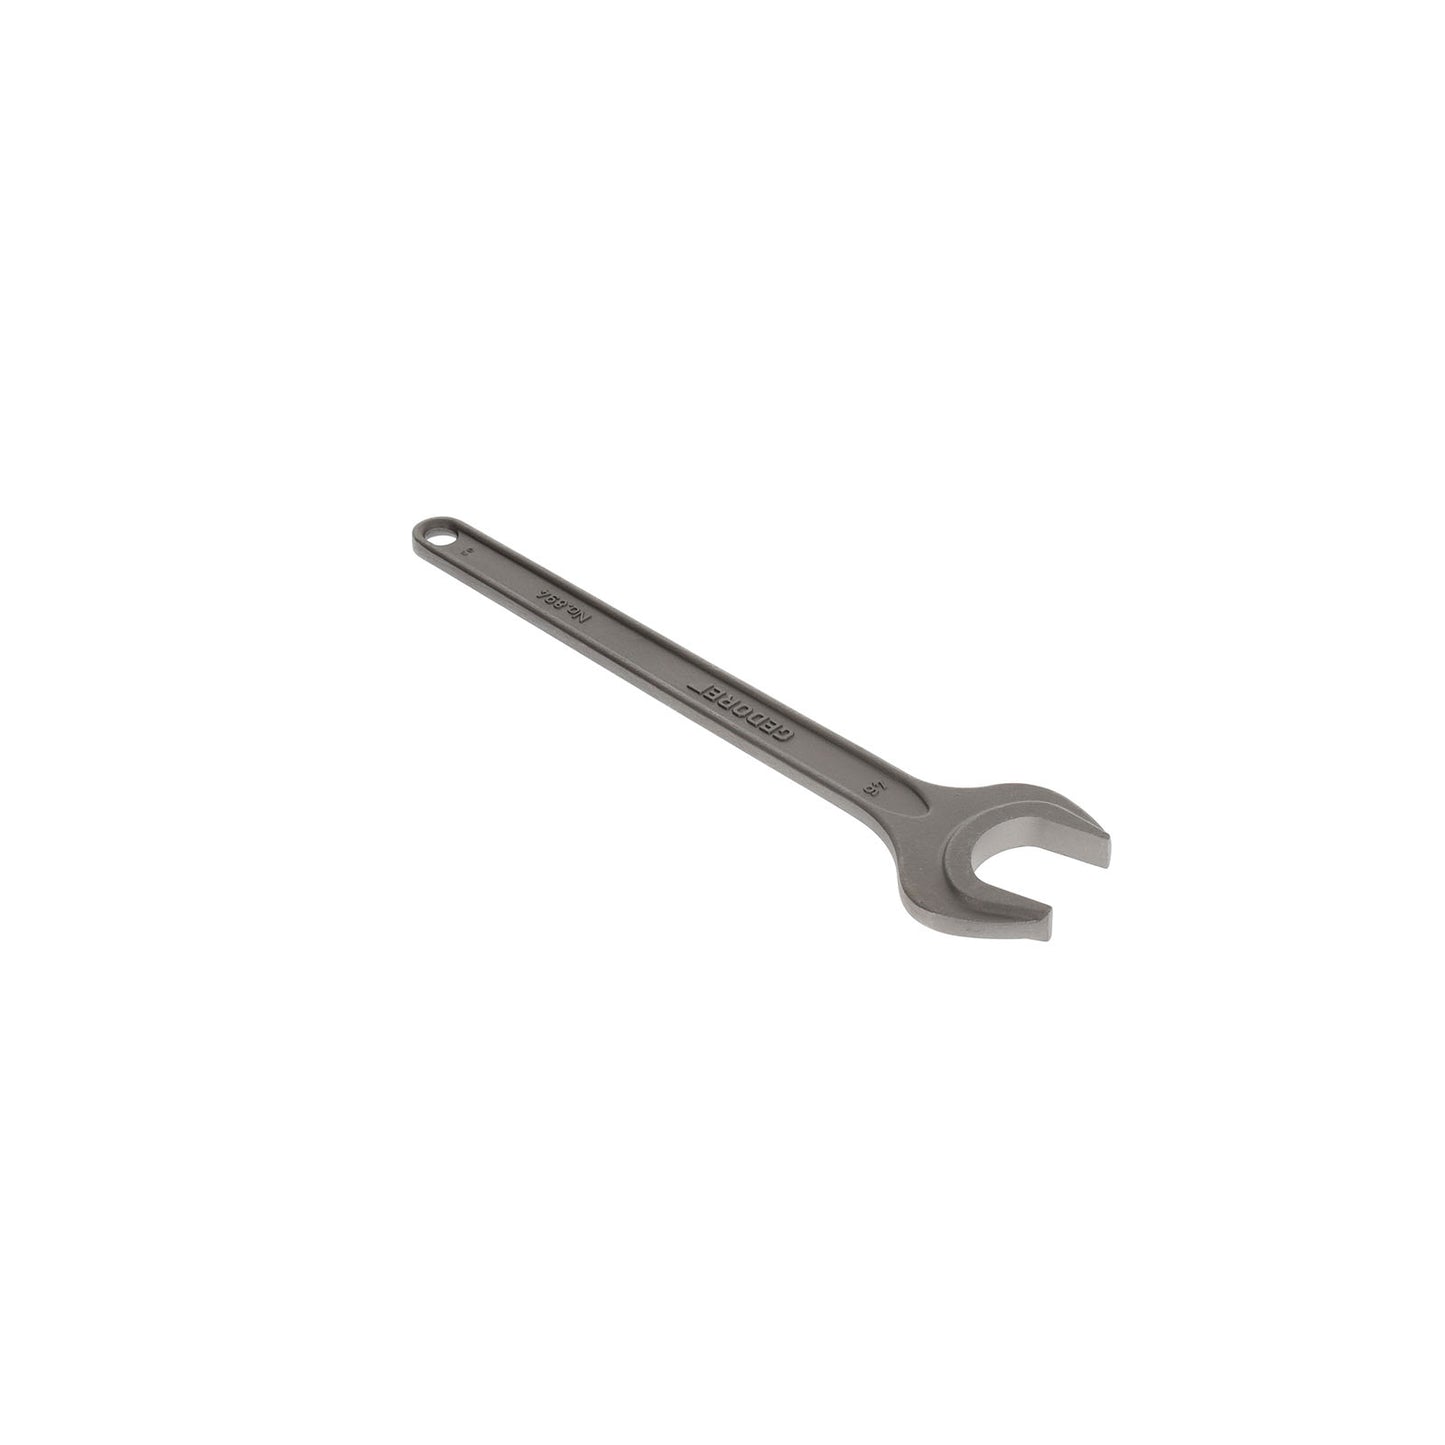 GEDORE 894 46 - 1 Open End Wrench, 46mm (6577000)